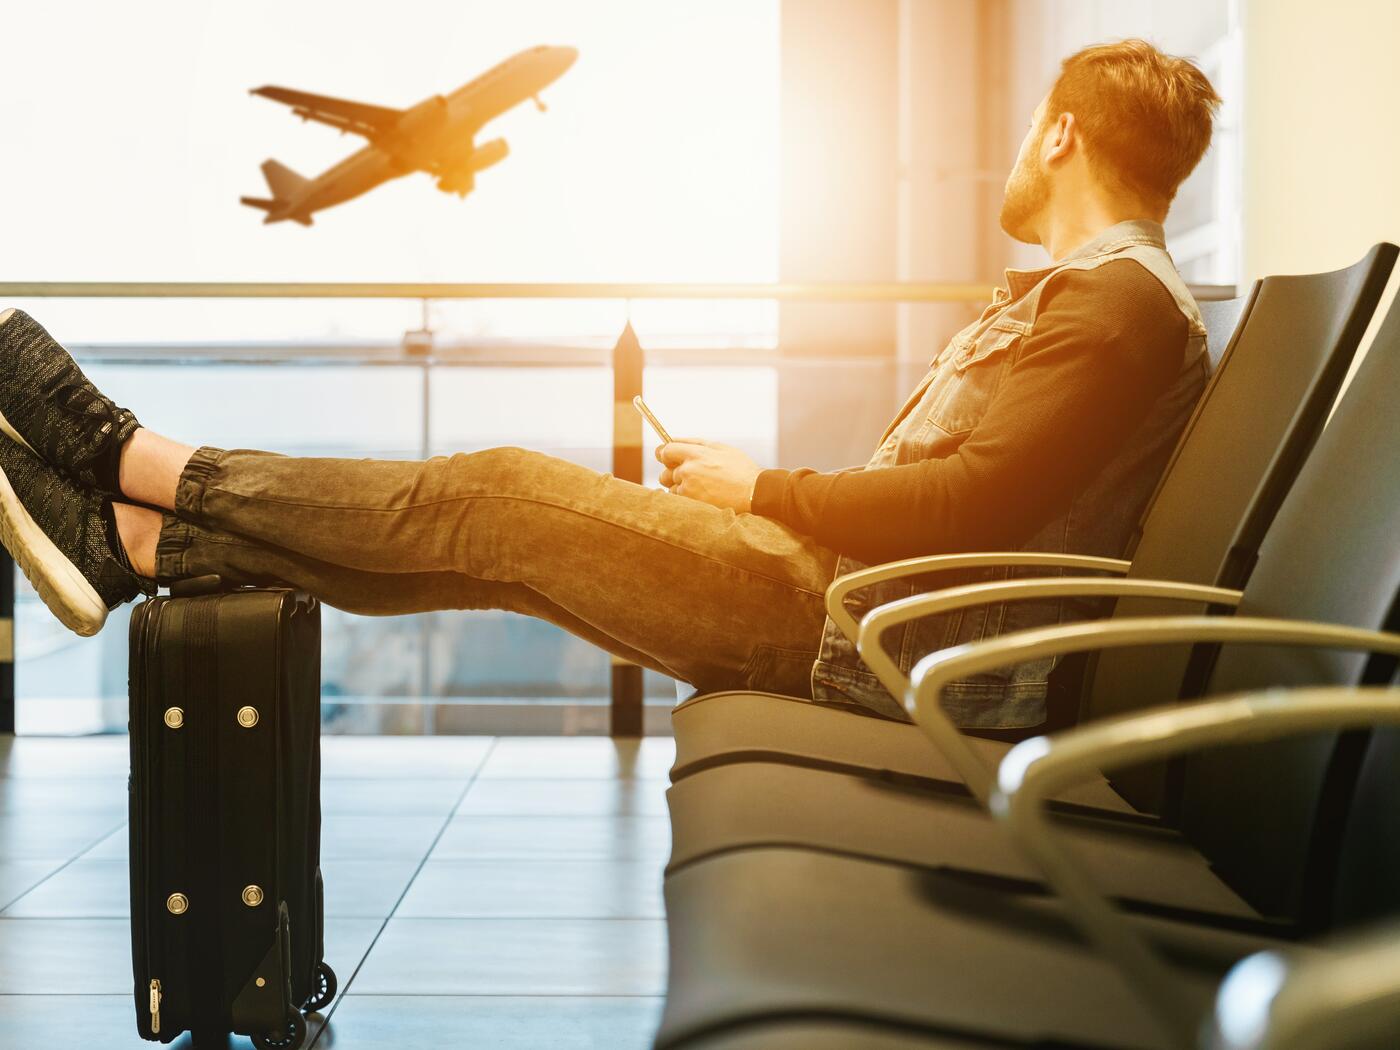 Man sitting in airport waiting area, staring out window at a plane taking off